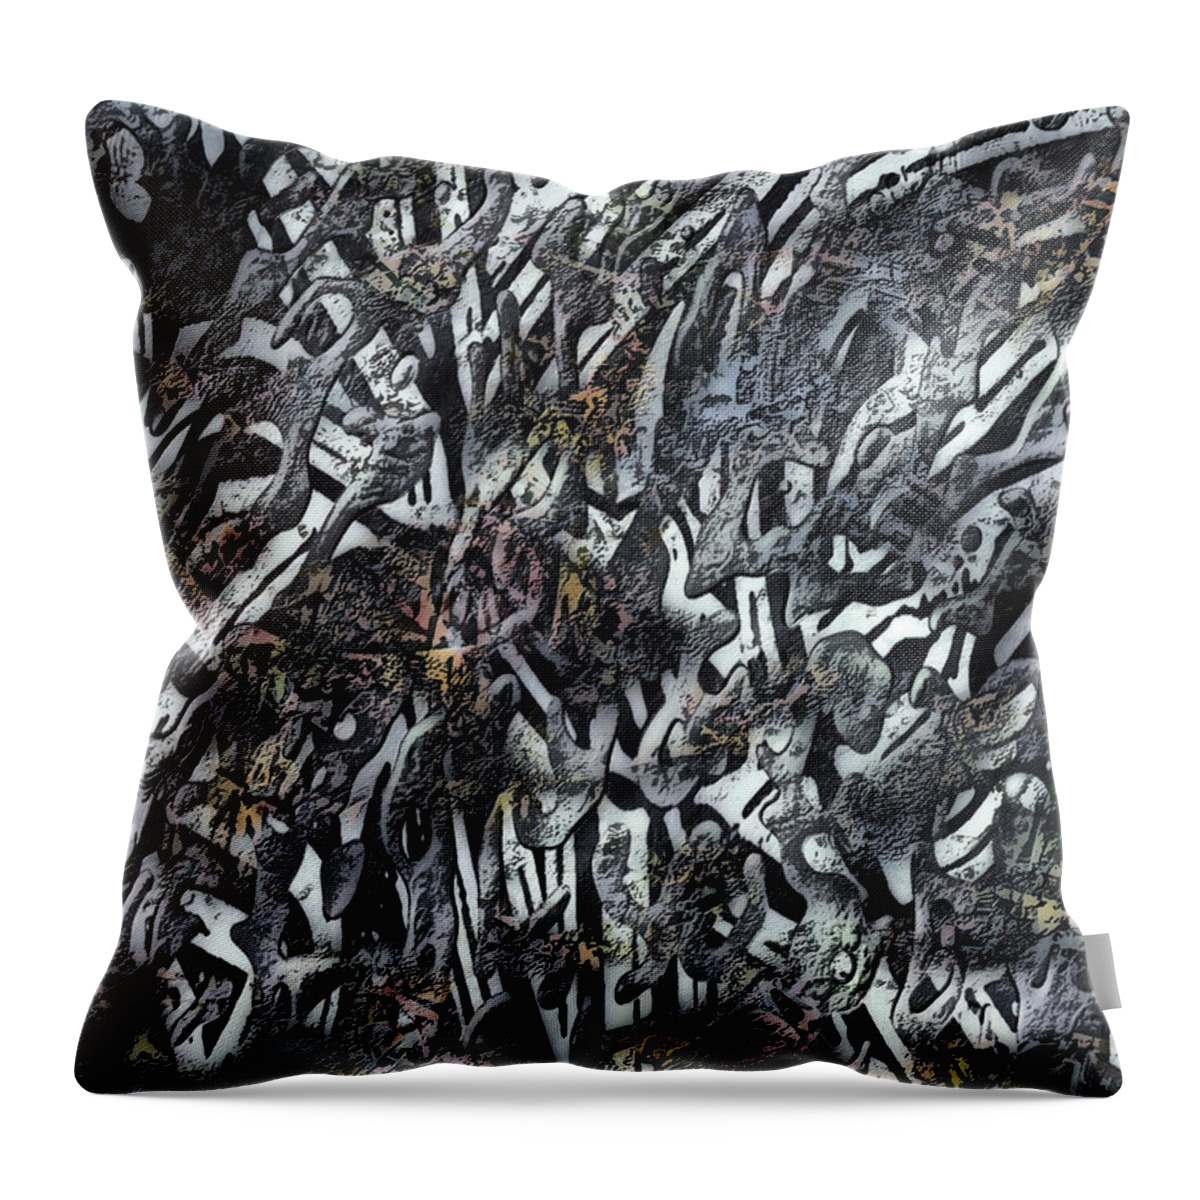 Abstract Throw Pillow featuring the digital art Etcagoes13 by Thomas Krahn